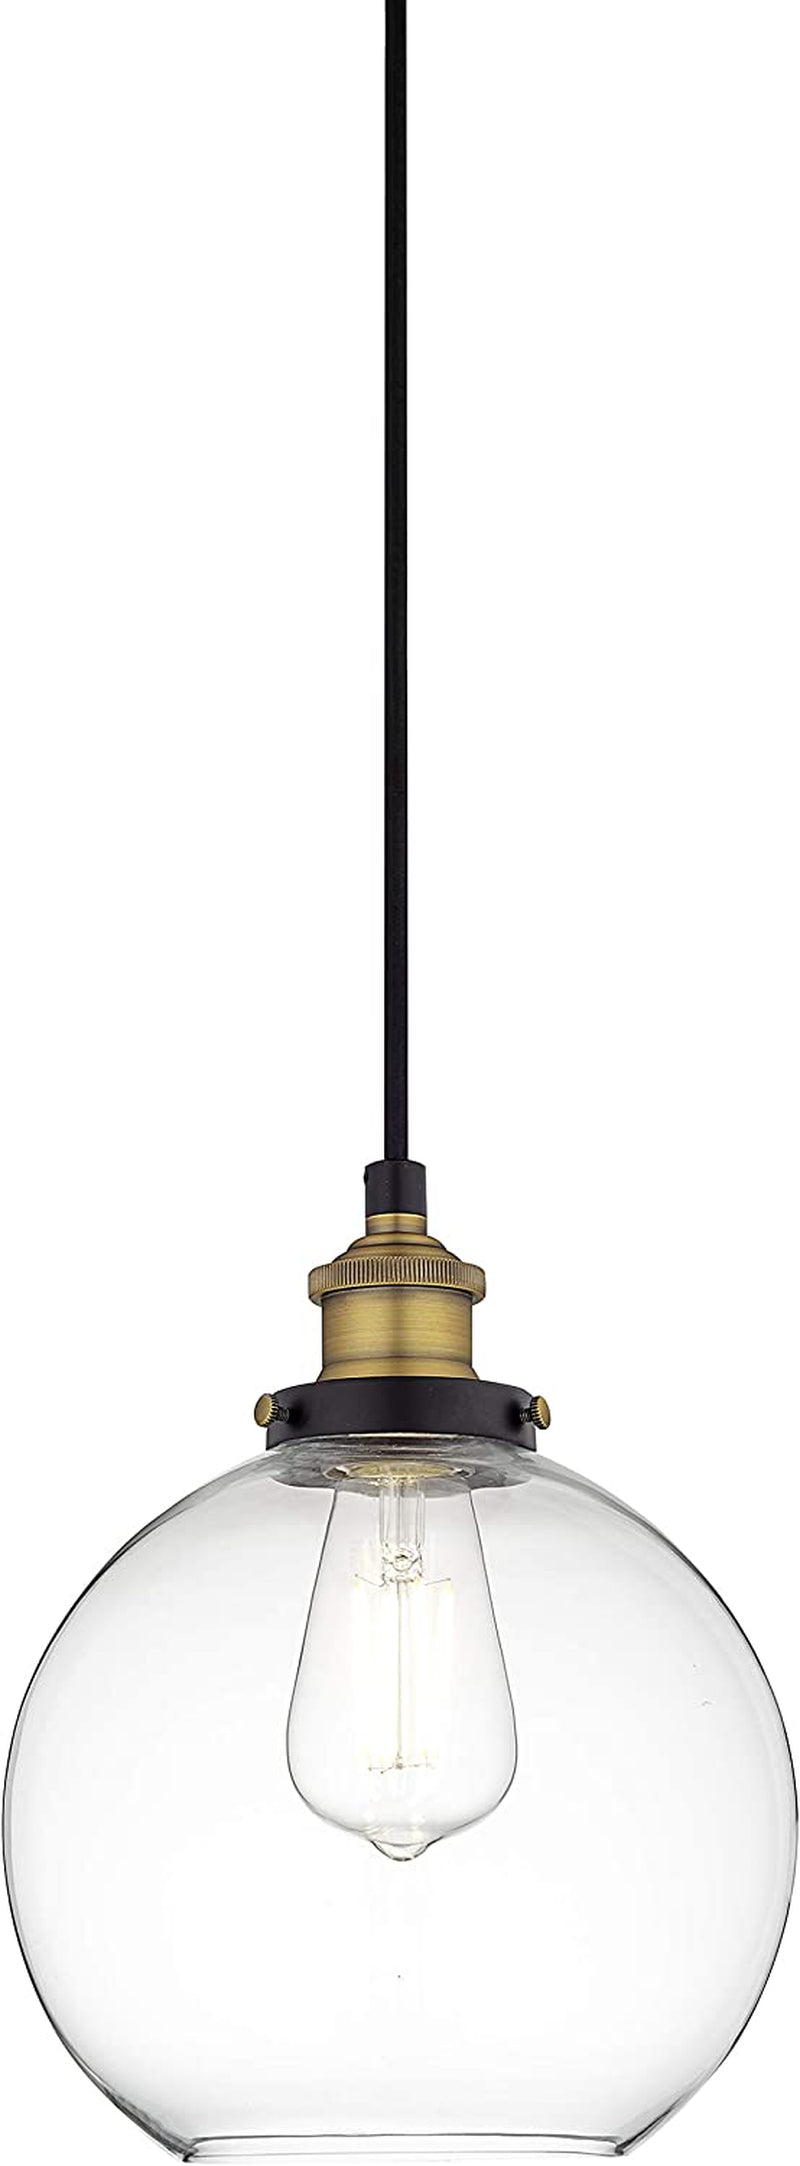 Linea Di Liara Primo Large Black and Gold Glass Globe Pendant Light Fixture Farmhouse Pendant Lighting for Kitchen Island Mid Century Modern Ceiling Light Clear Glass Shade, UL Listed Home & Garden > Lighting > Lighting Fixtures Linea di Liara   